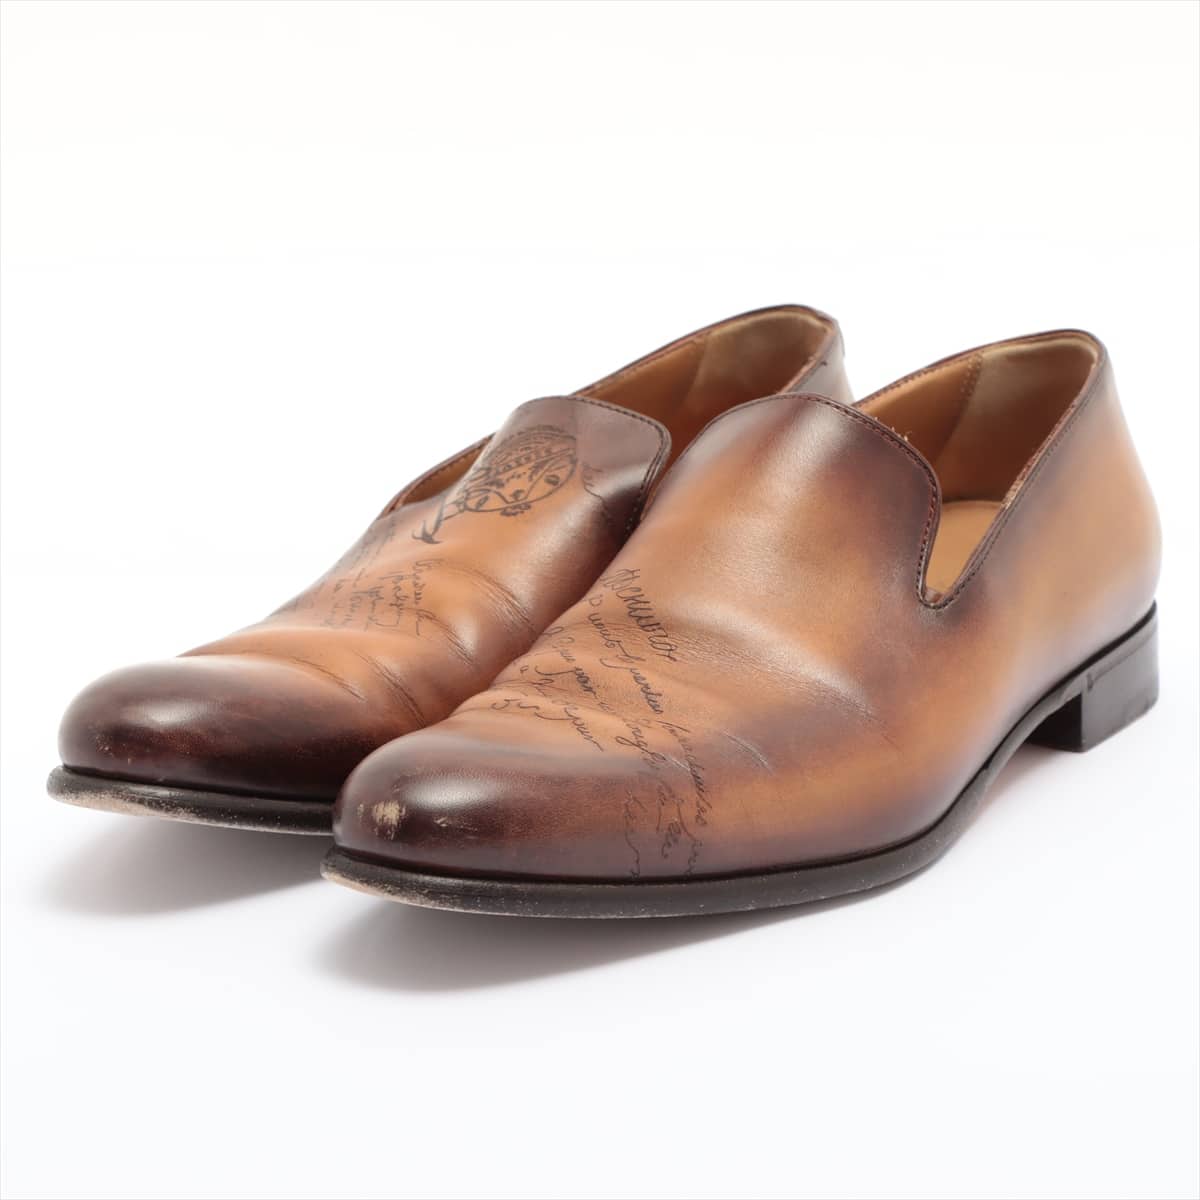 Berluti Calligraphy Leather Loafer 8 Men's Brown